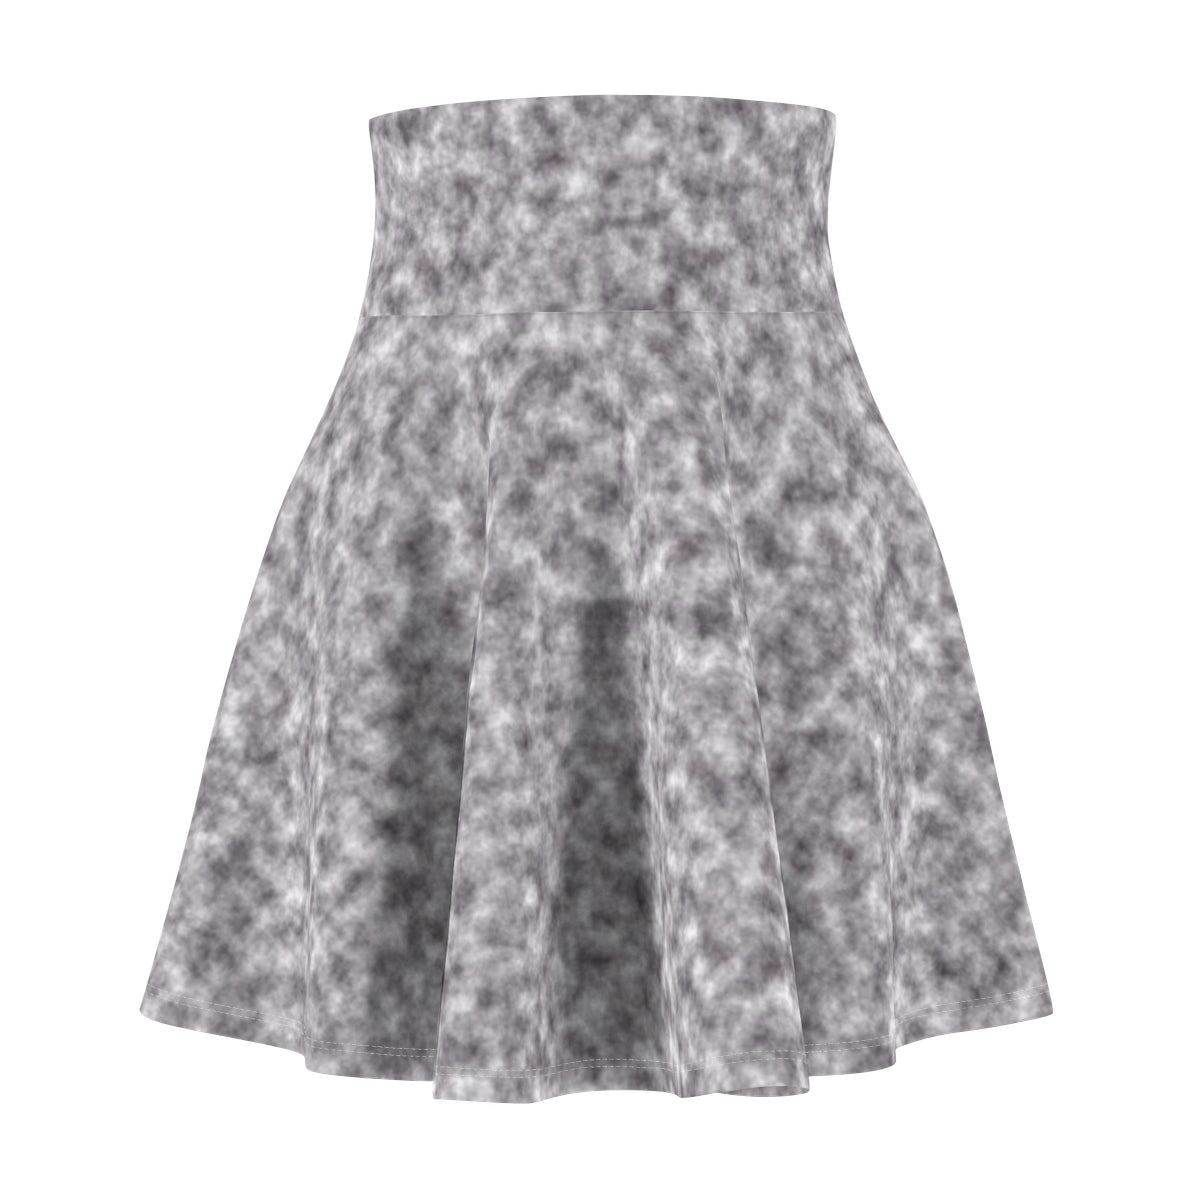 Gray and White Clouds Skater Skirt